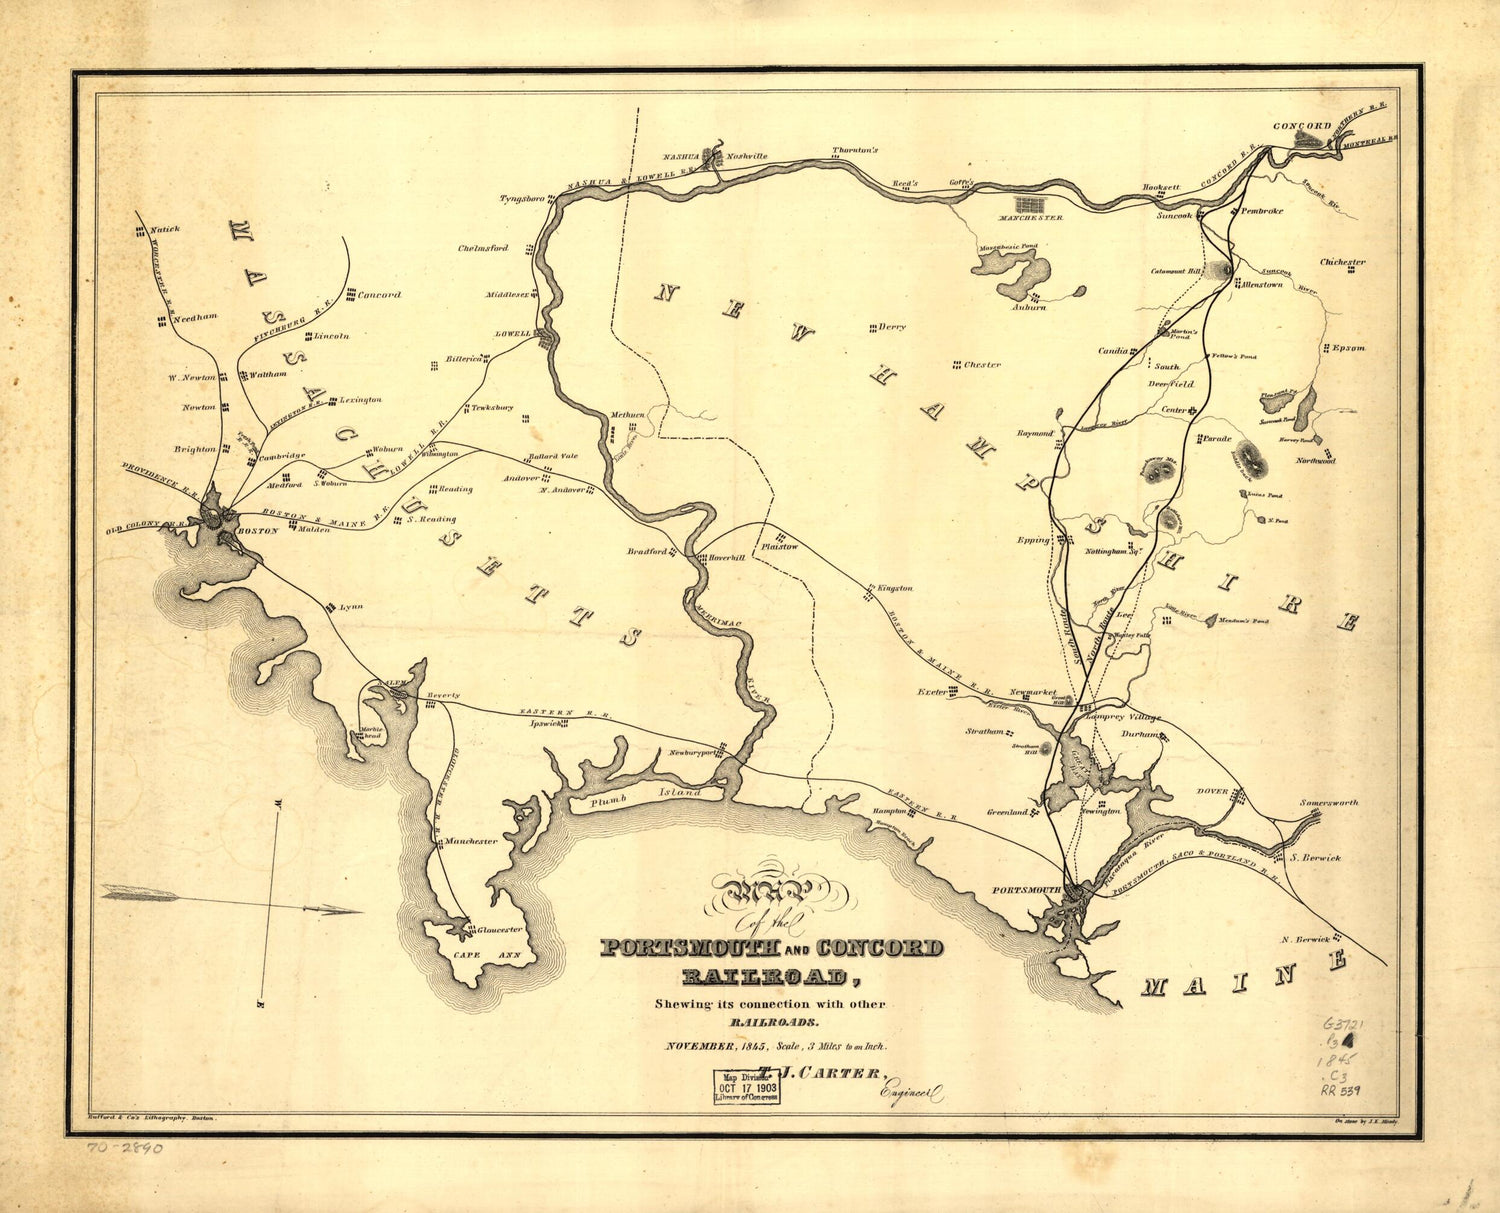 This old map of Map of the Portsmouth and Concord Railroad, Shewing Its Connection With Other Railroads from 1845 was created by T. J. Carter,  J.H. Bufford &amp; Co in 1845